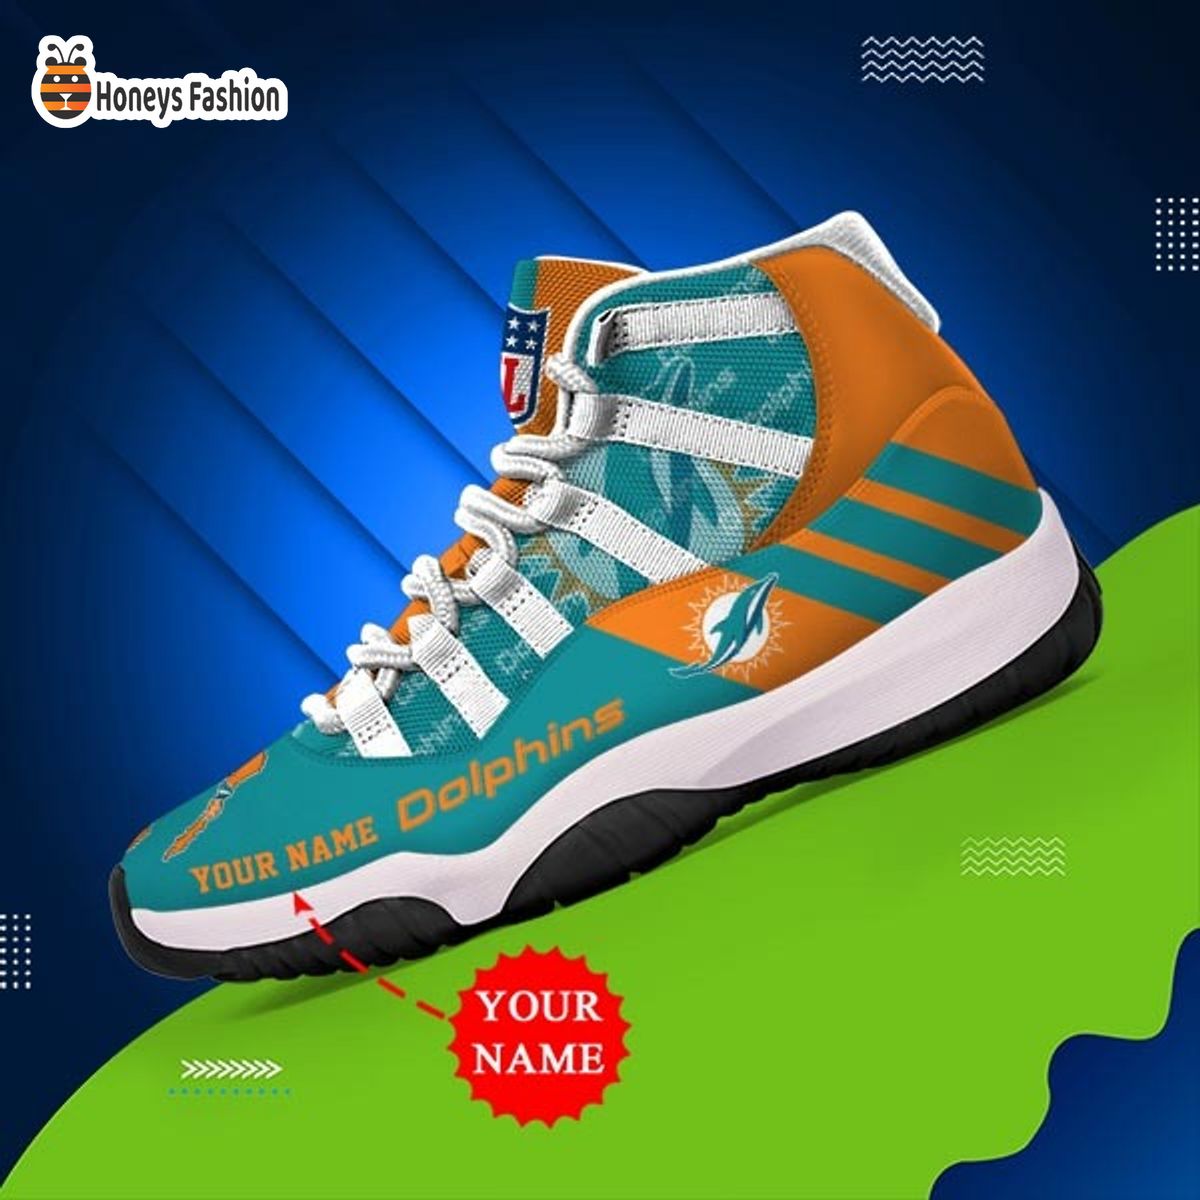 Miami Dolphins NFL Adidas Personalized Air Jordan 11 Shoes